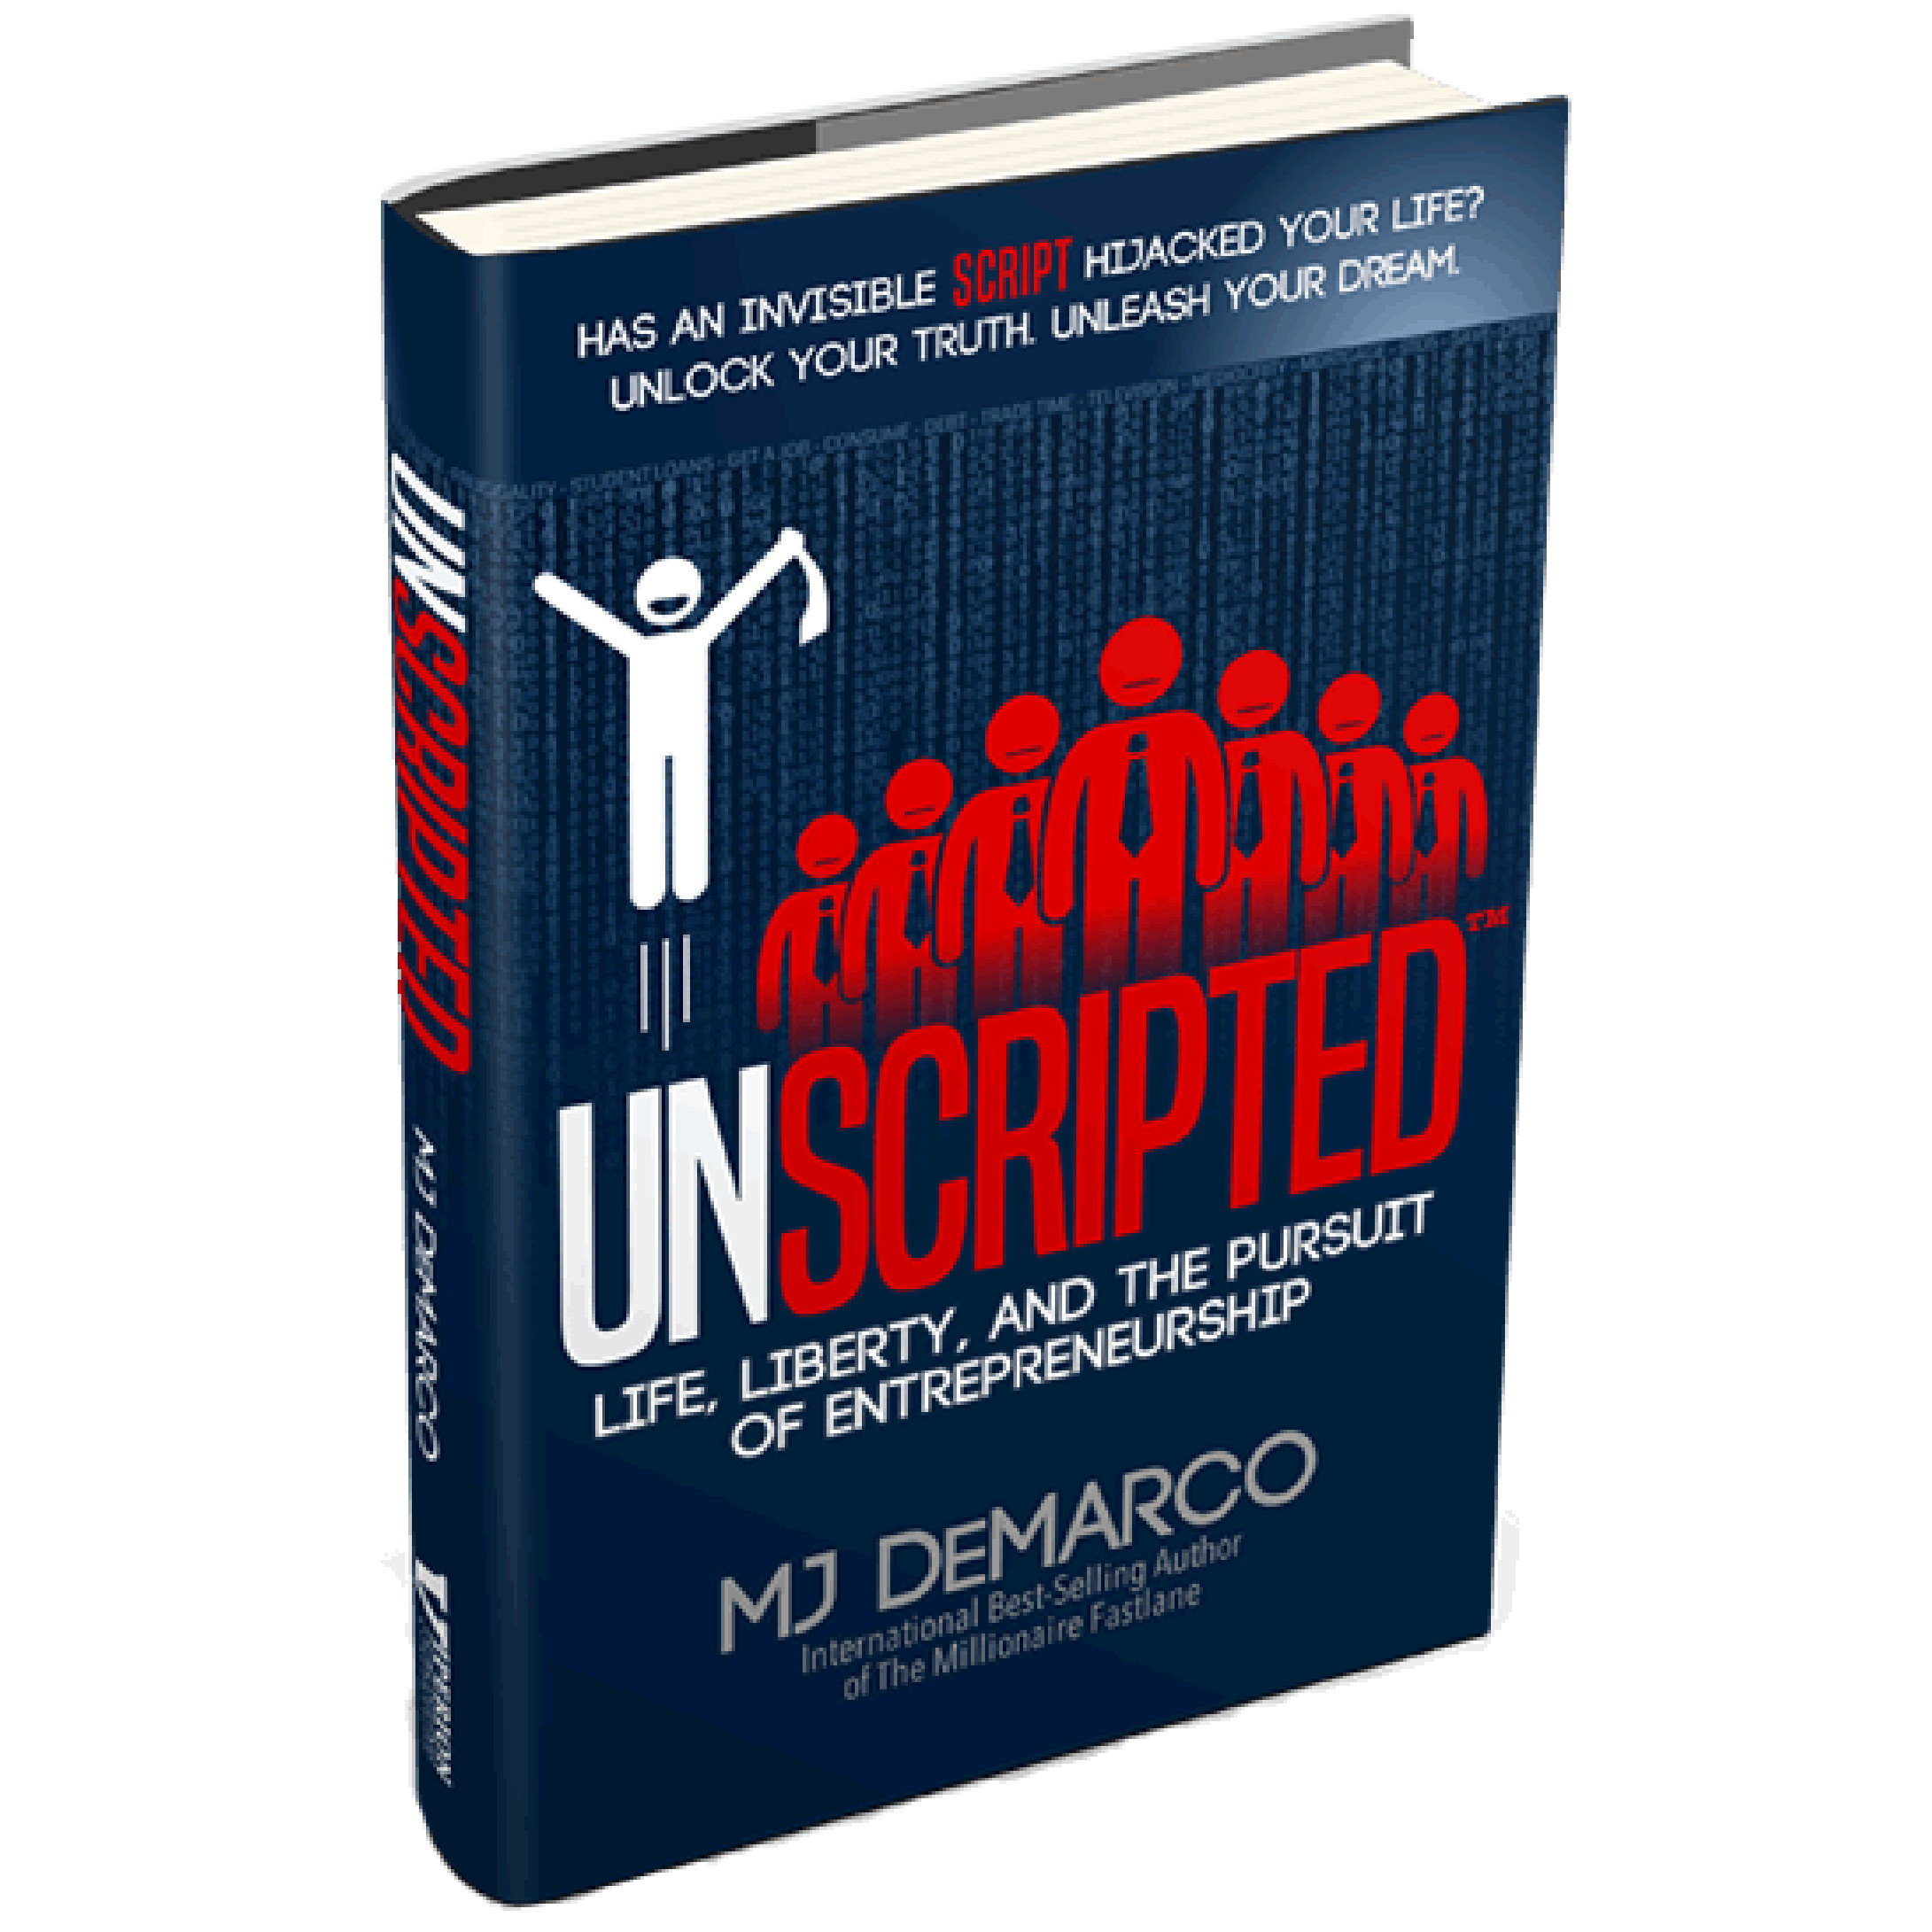 Unscripted: Life, Liberty, and the Pursuit of Entrepreneurship